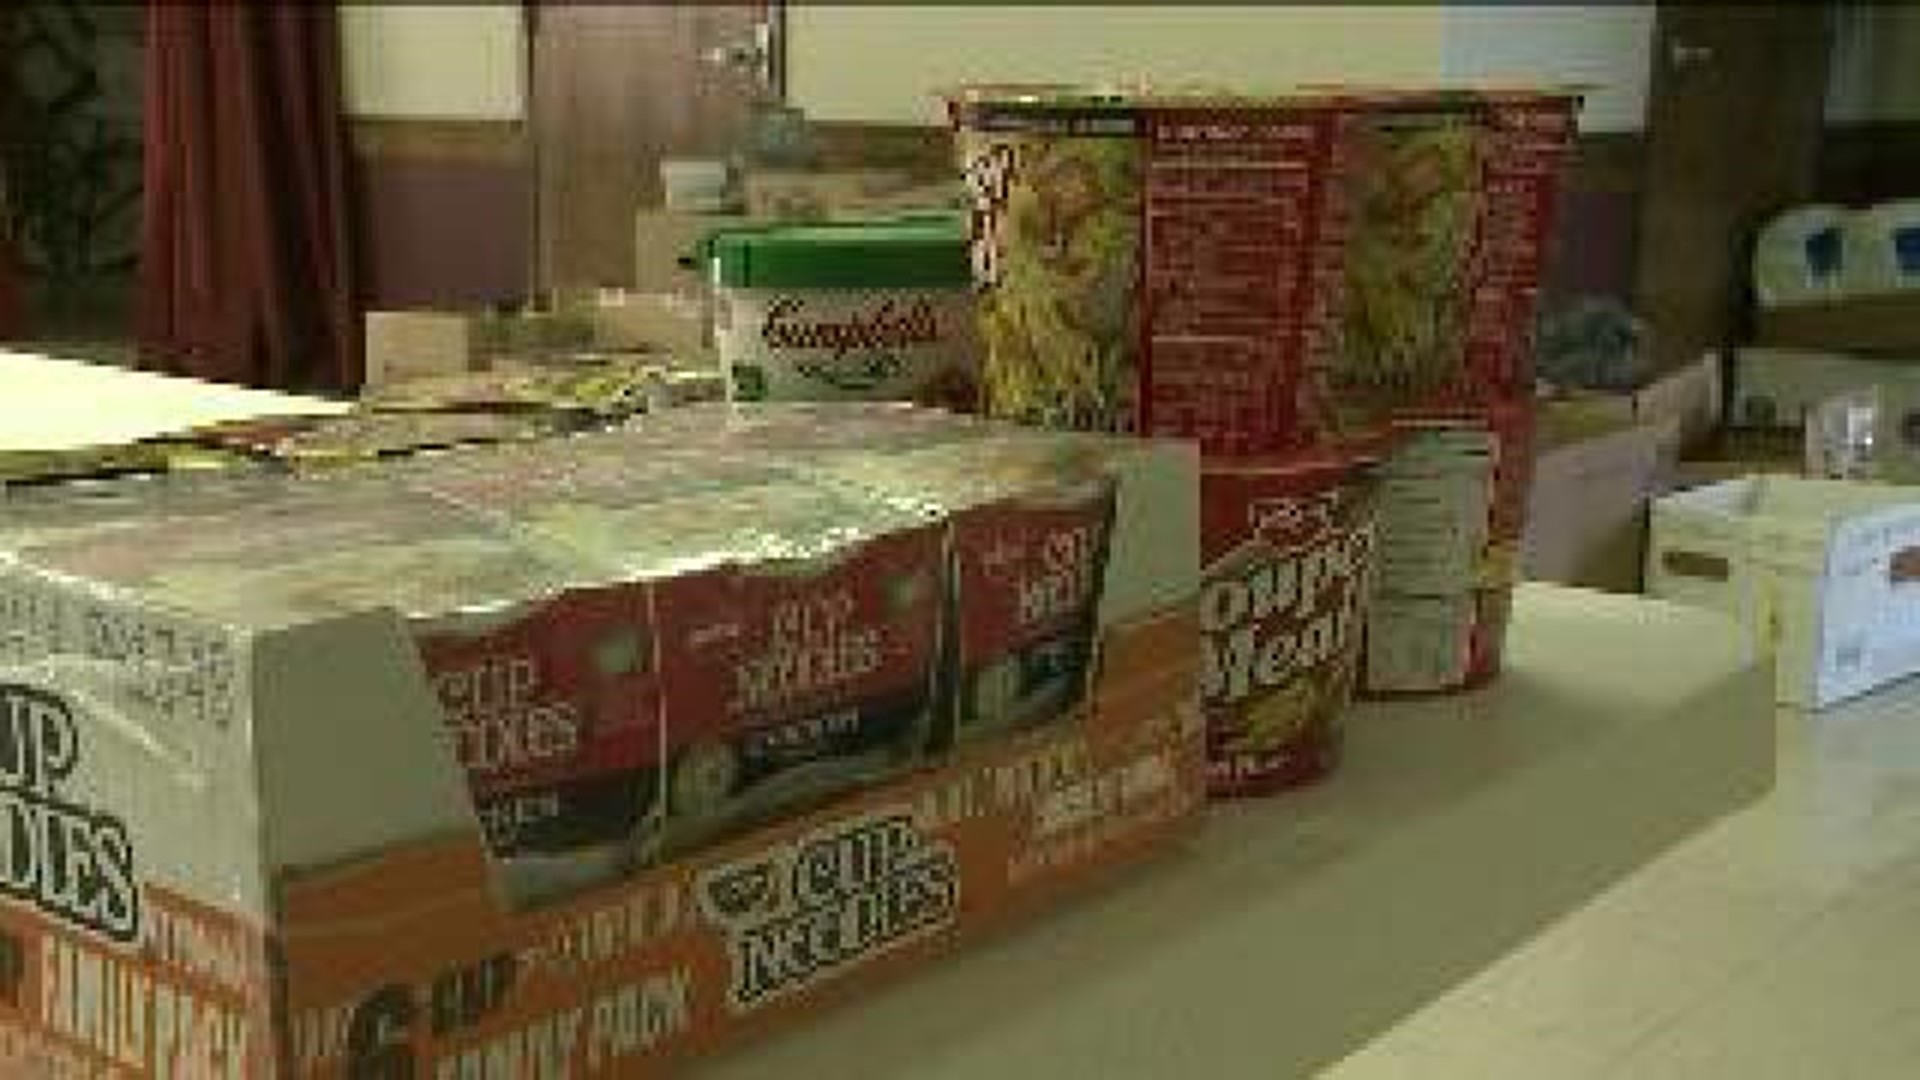 Event Makes Care Packages for Troops Overseas